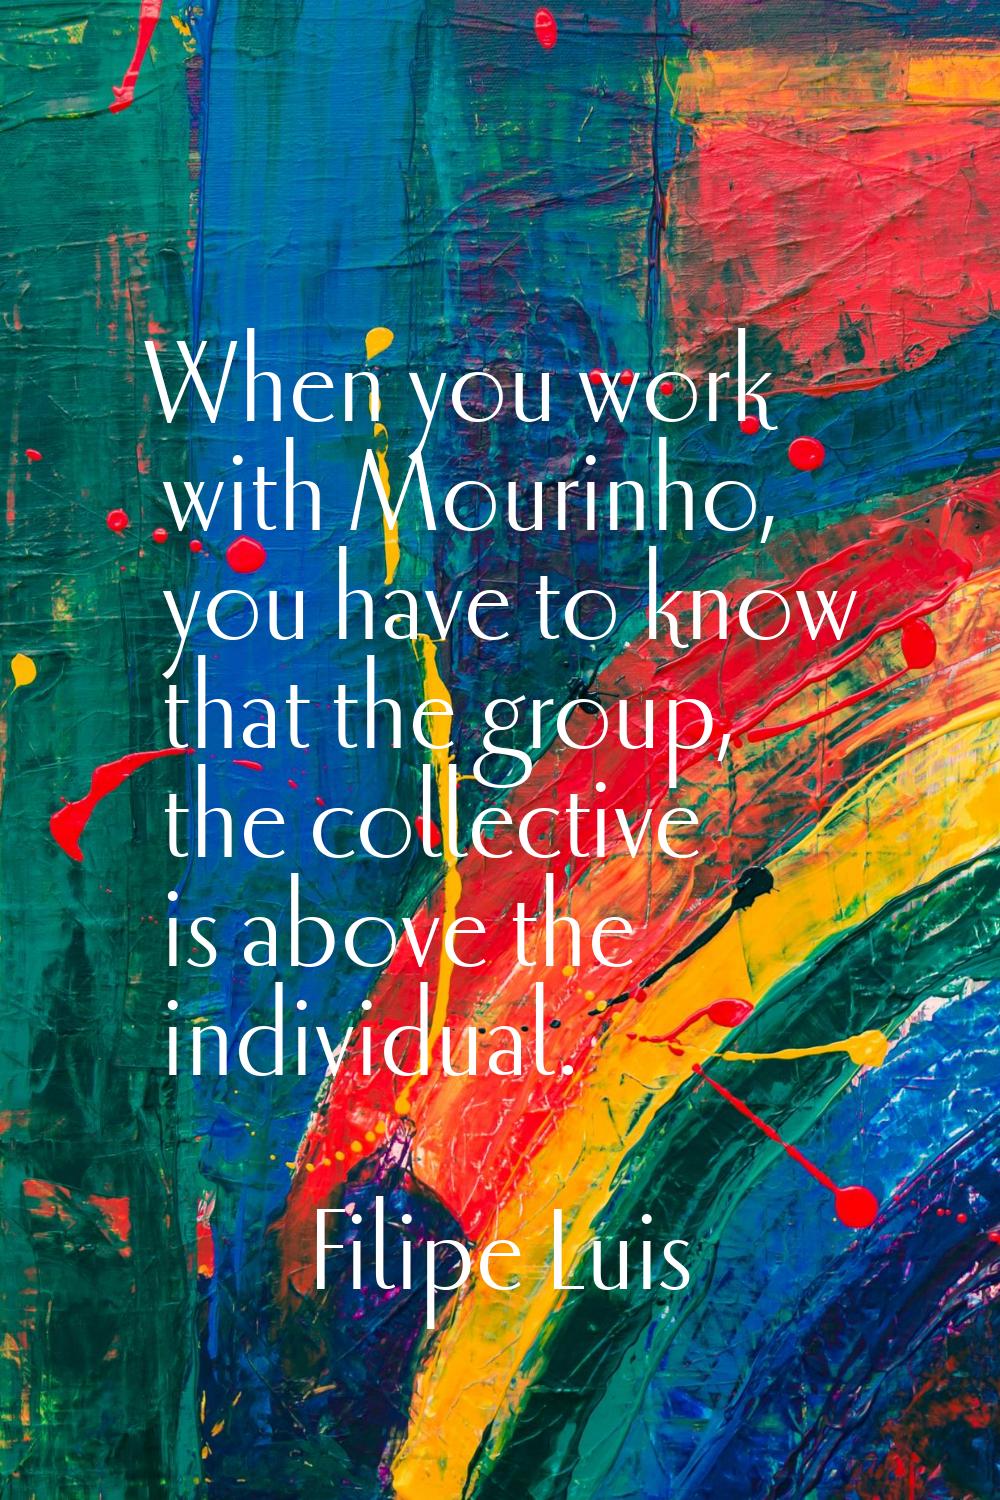 When you work with Mourinho, you have to know that the group, the collective is above the individua